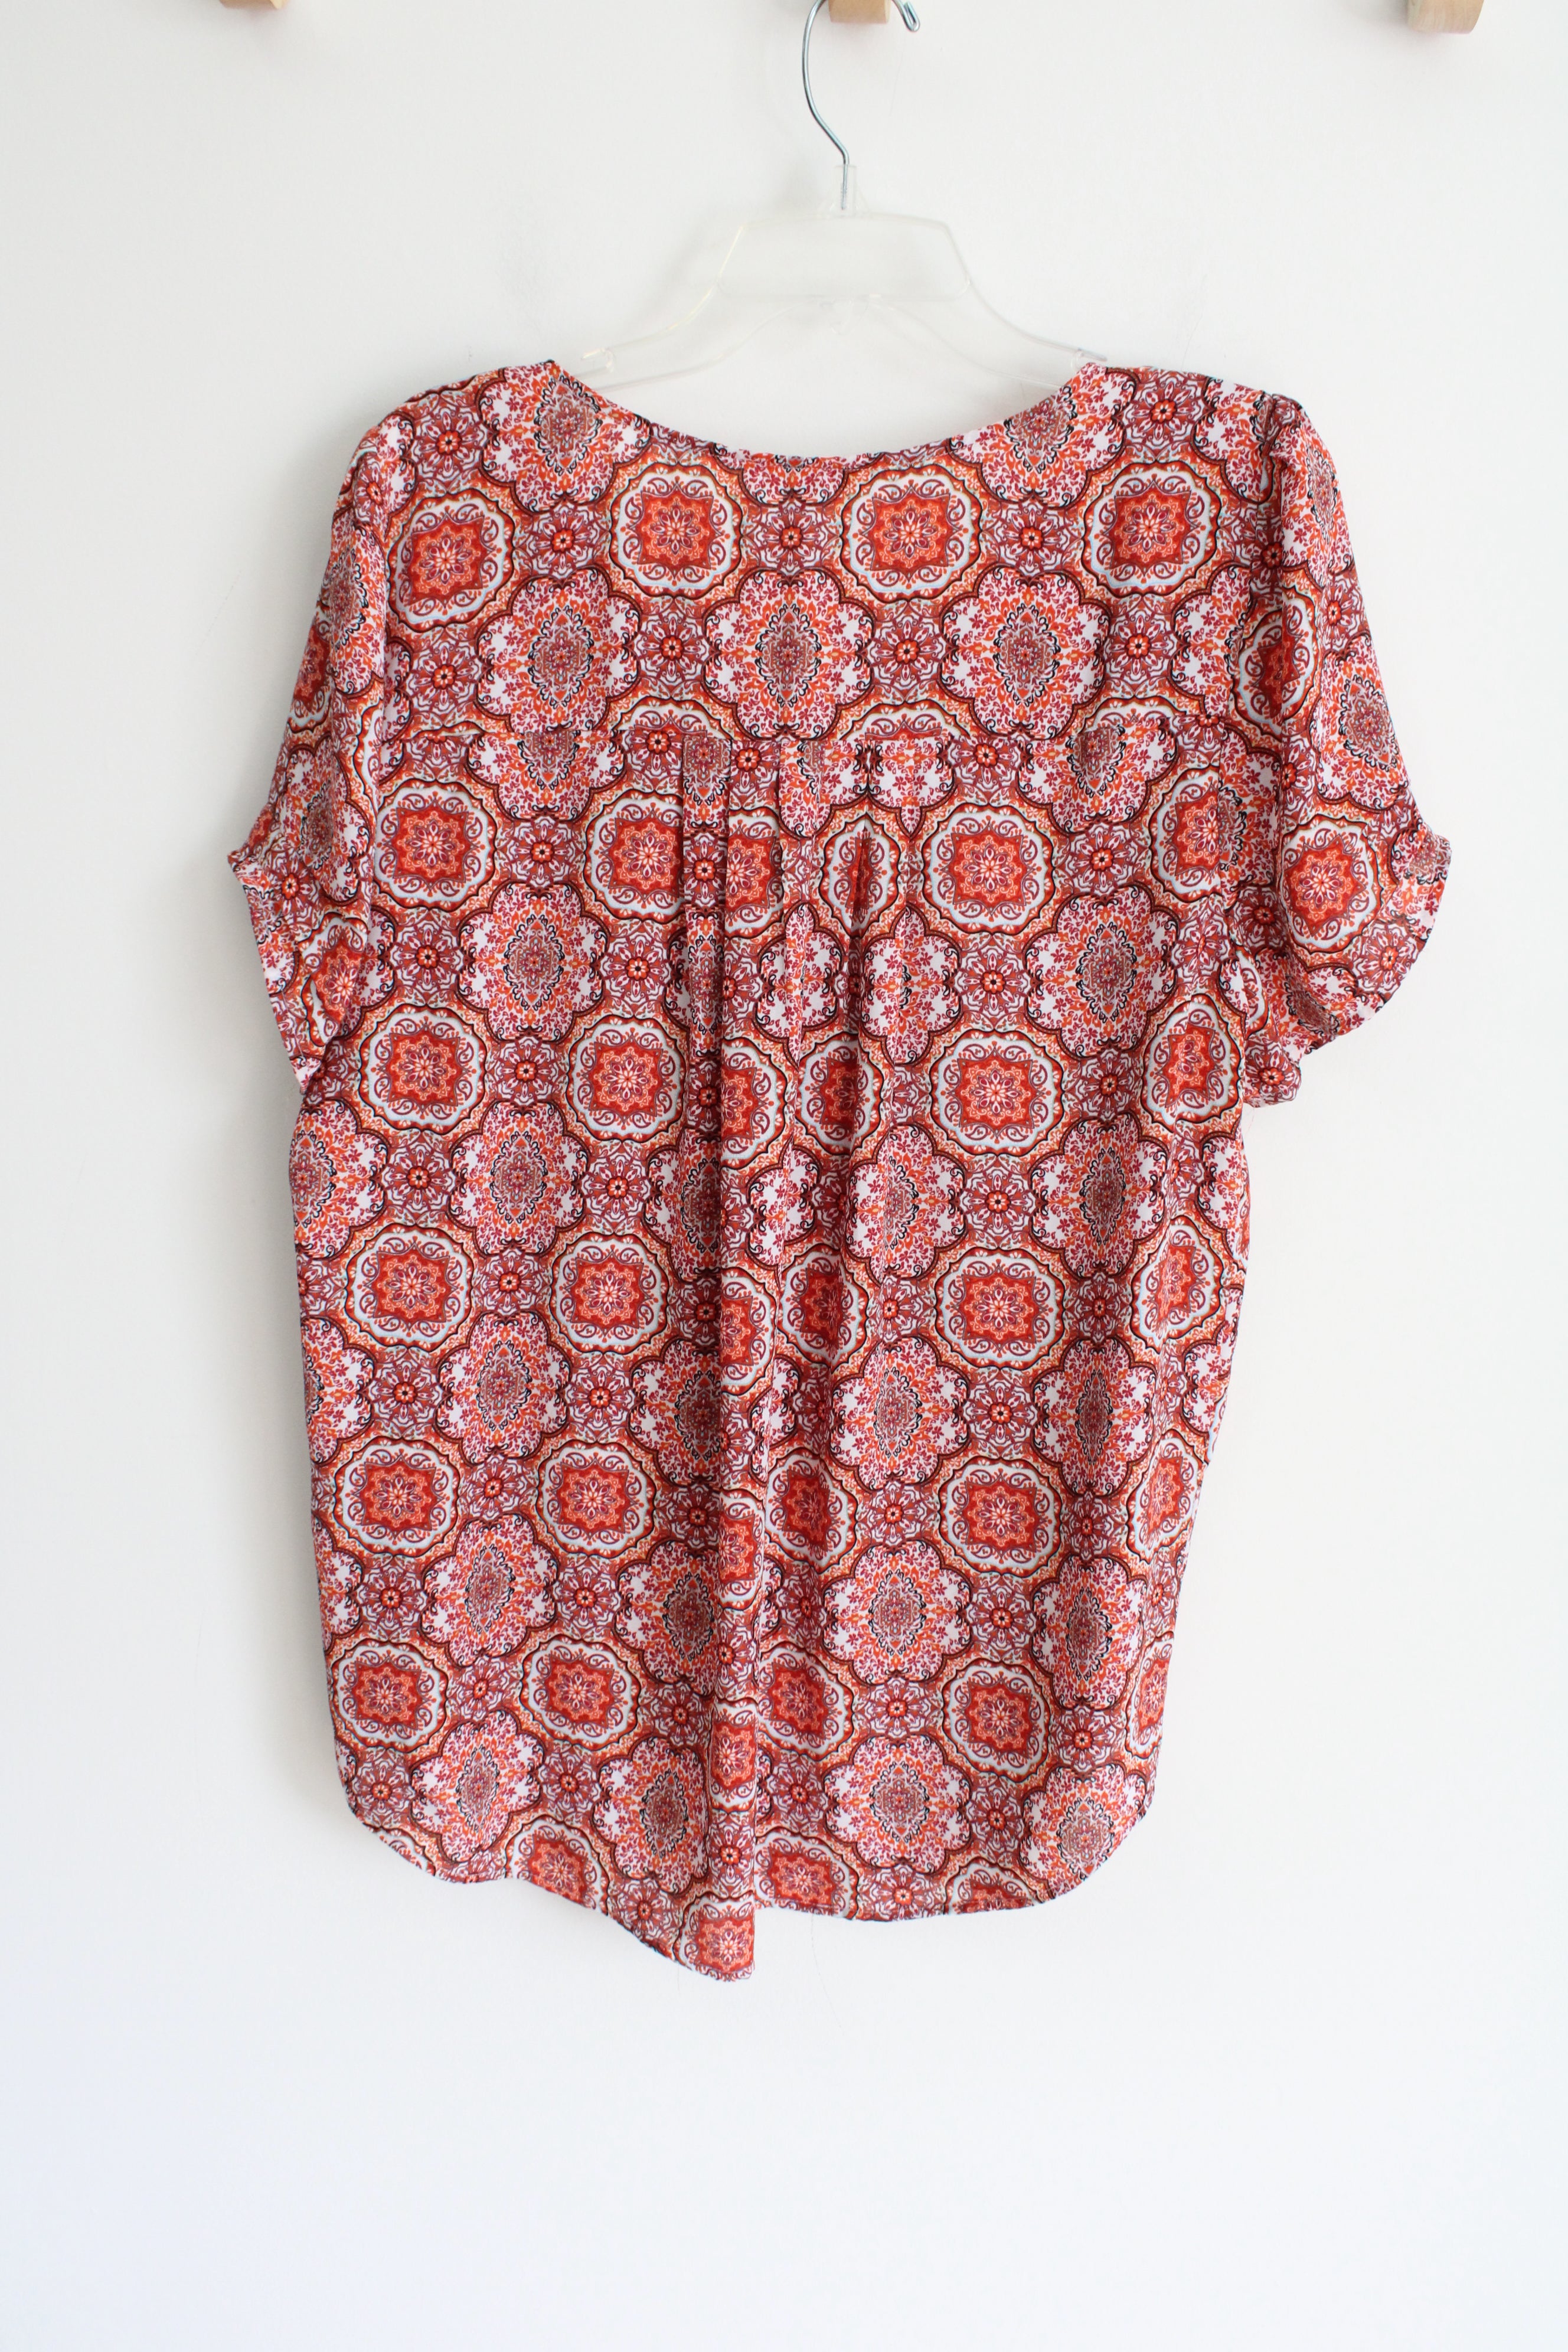 DR2 Red Patterned Blouse | XL